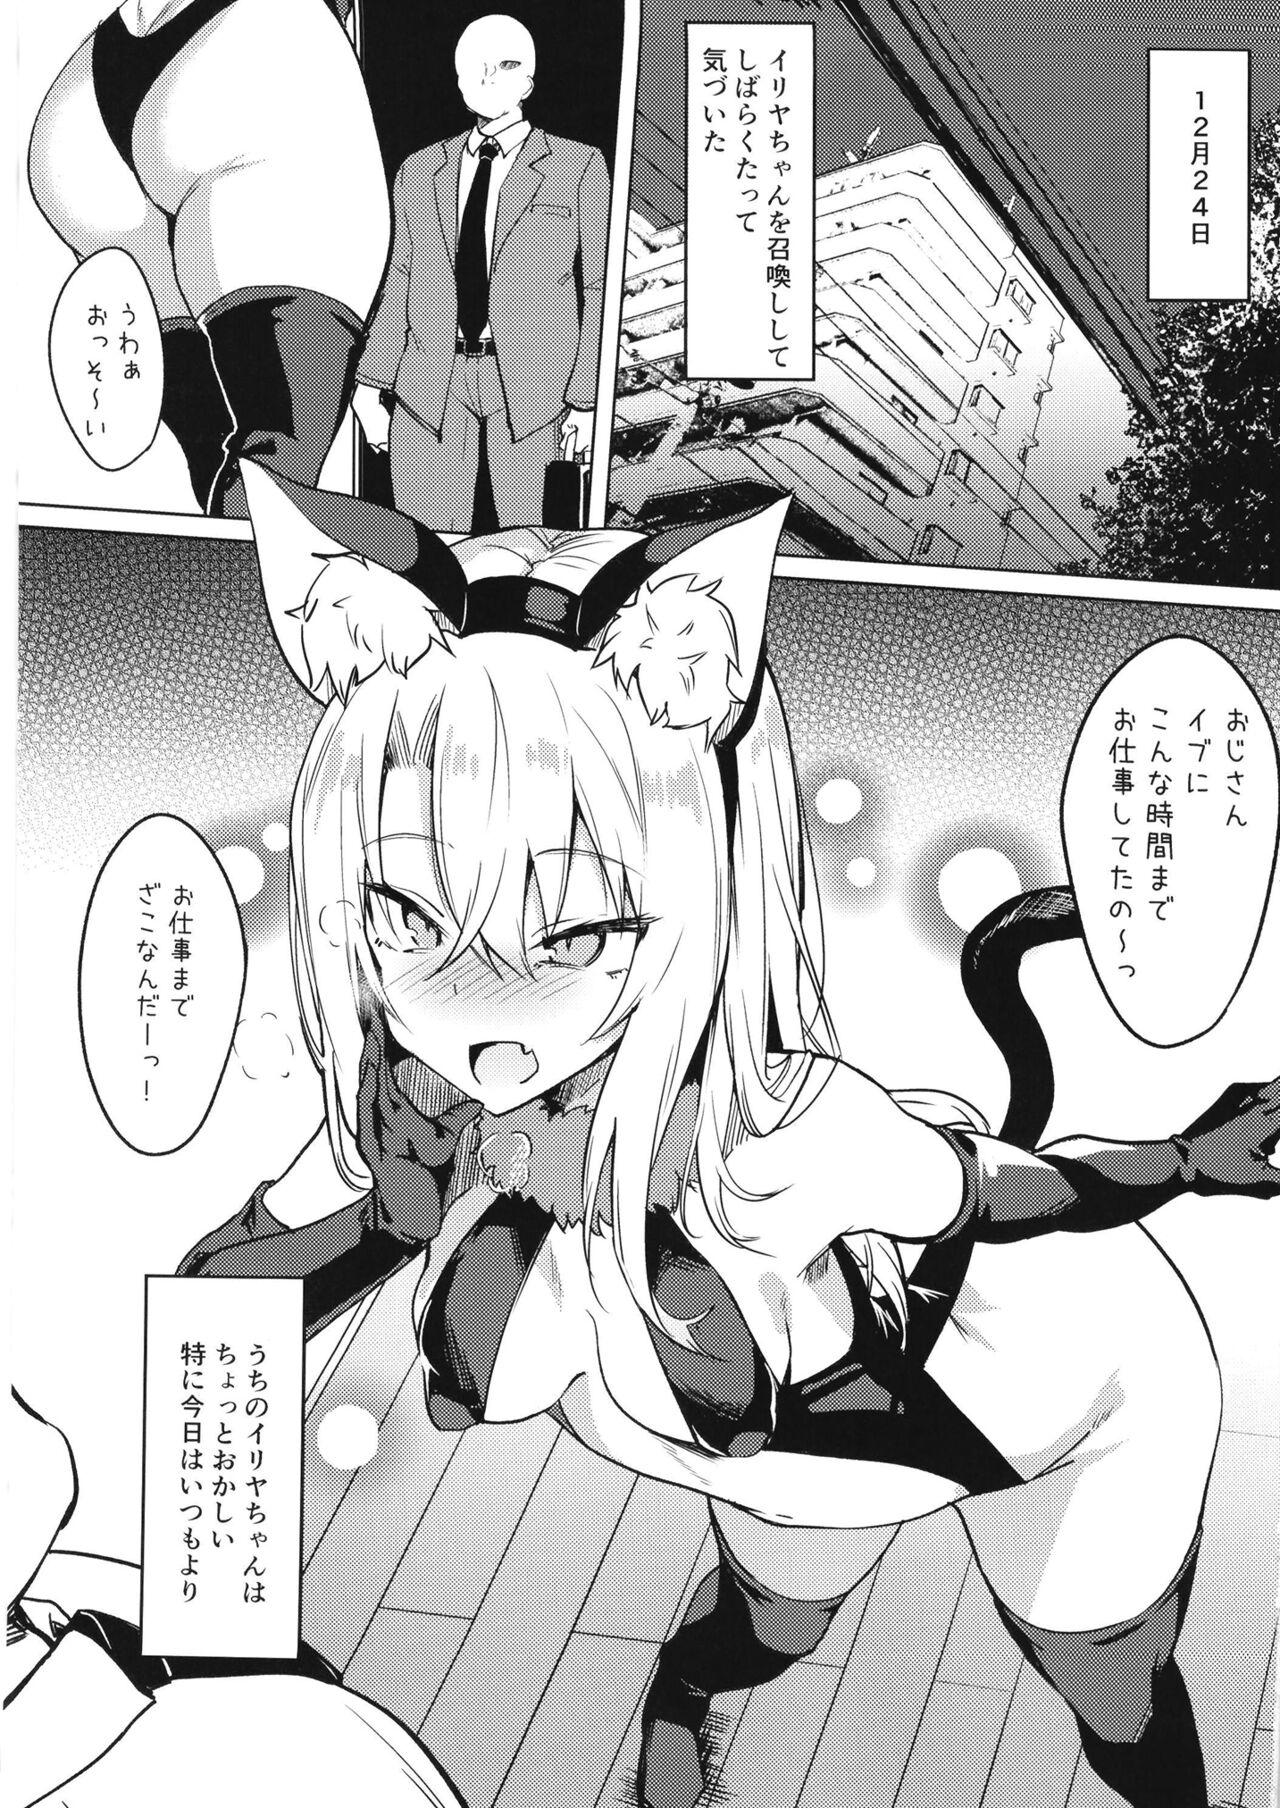 Dykes Mesugaki Bitch na Illya-chan to Asobo - Fate kaleid liner prisma illya Officesex - Page 3